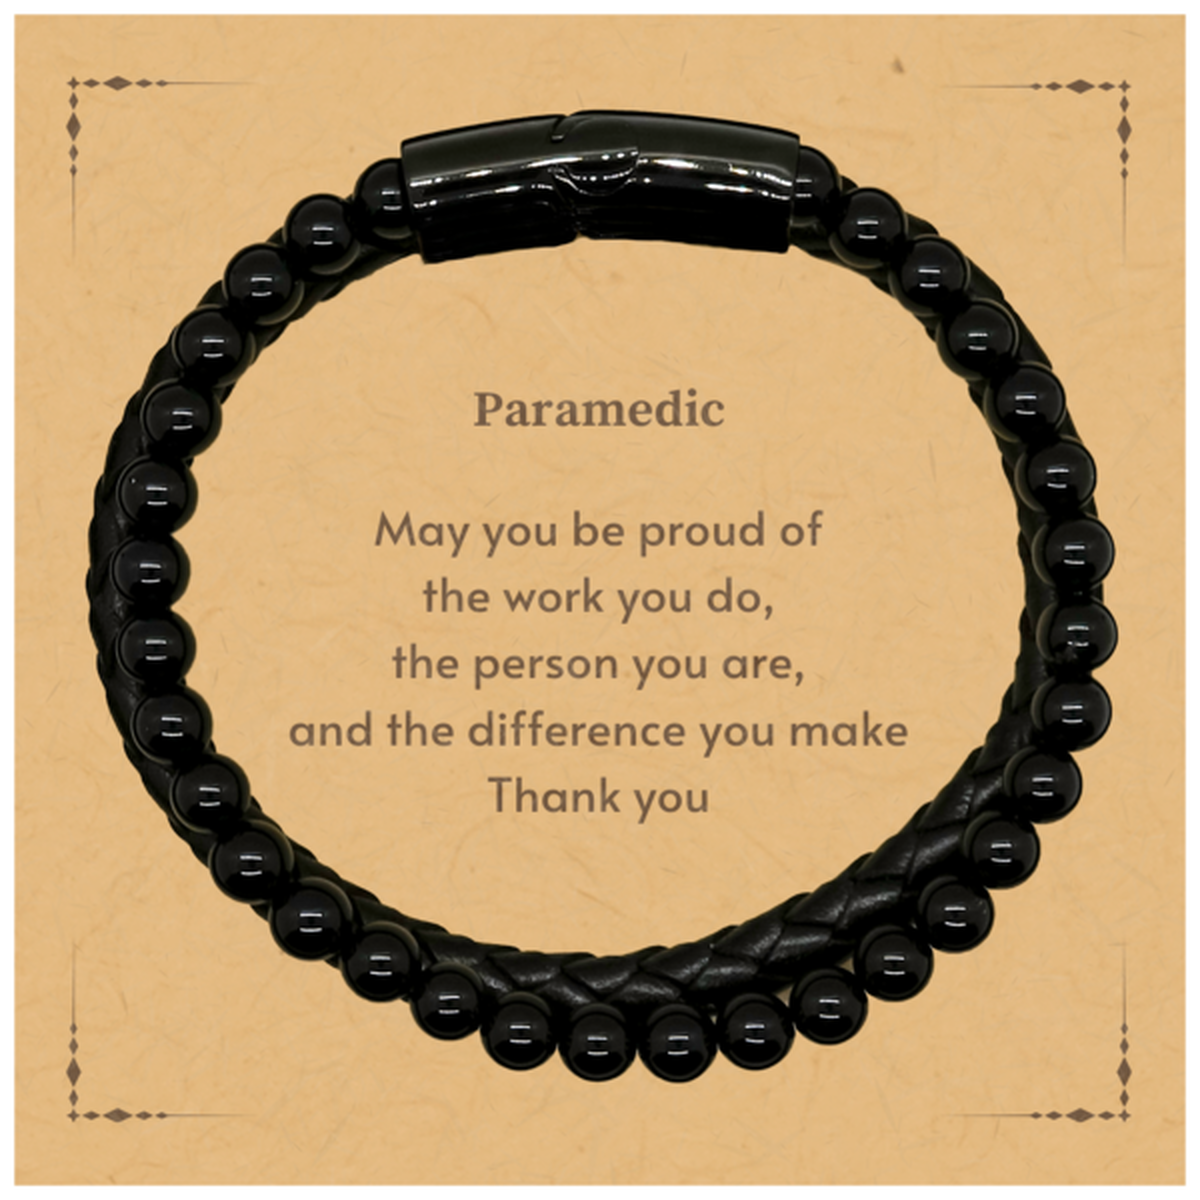 Heartwarming Stone Leather Bracelets Retirement Coworkers Gifts for Paramedic, Paramedic May You be proud of the work you do, the person you are Gifts for Boss Men Women Friends